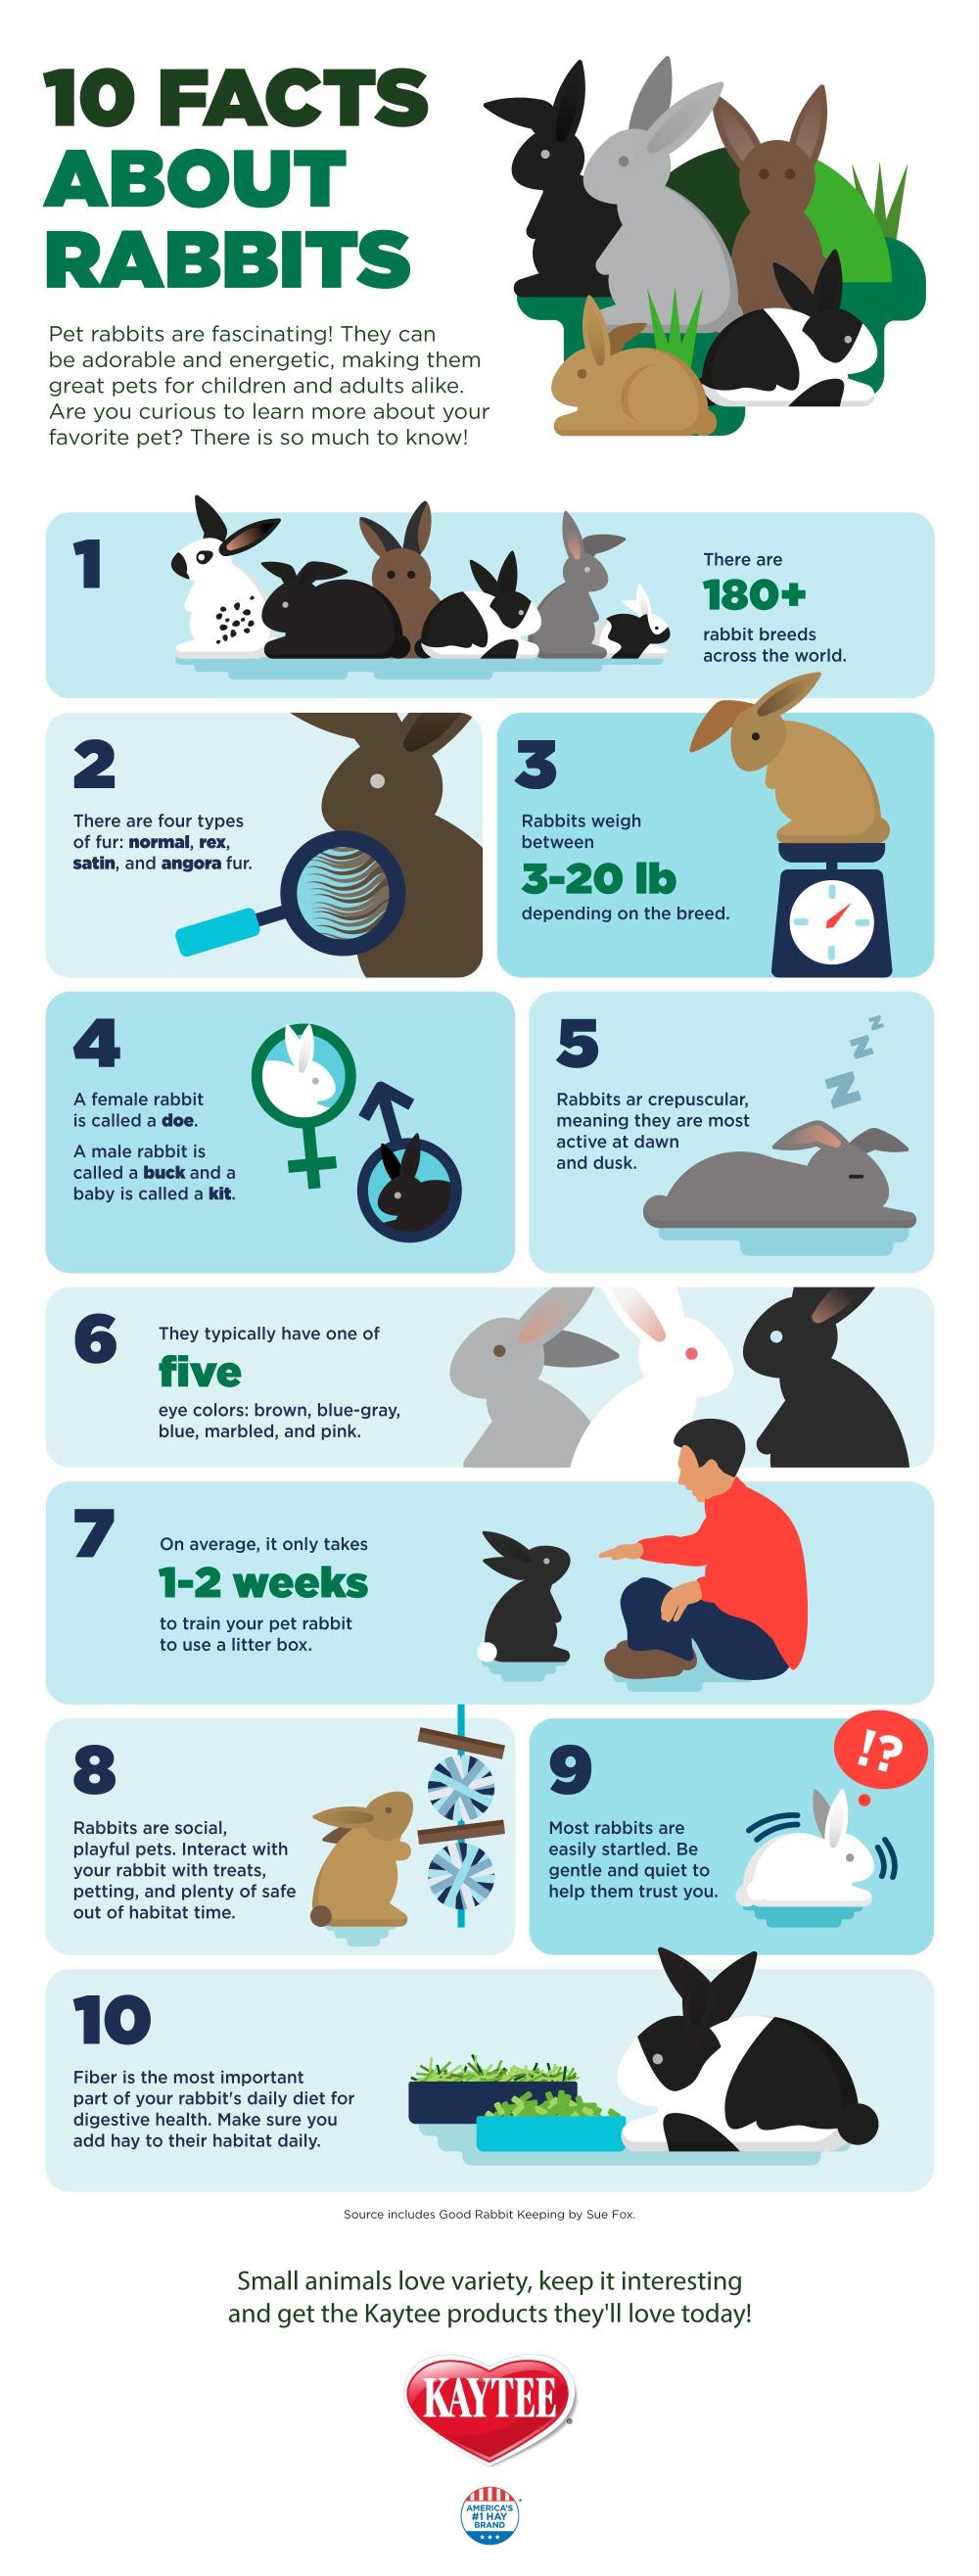 7 Fun Facts About Rabbit Eyes and 5 Problems to Look Out For